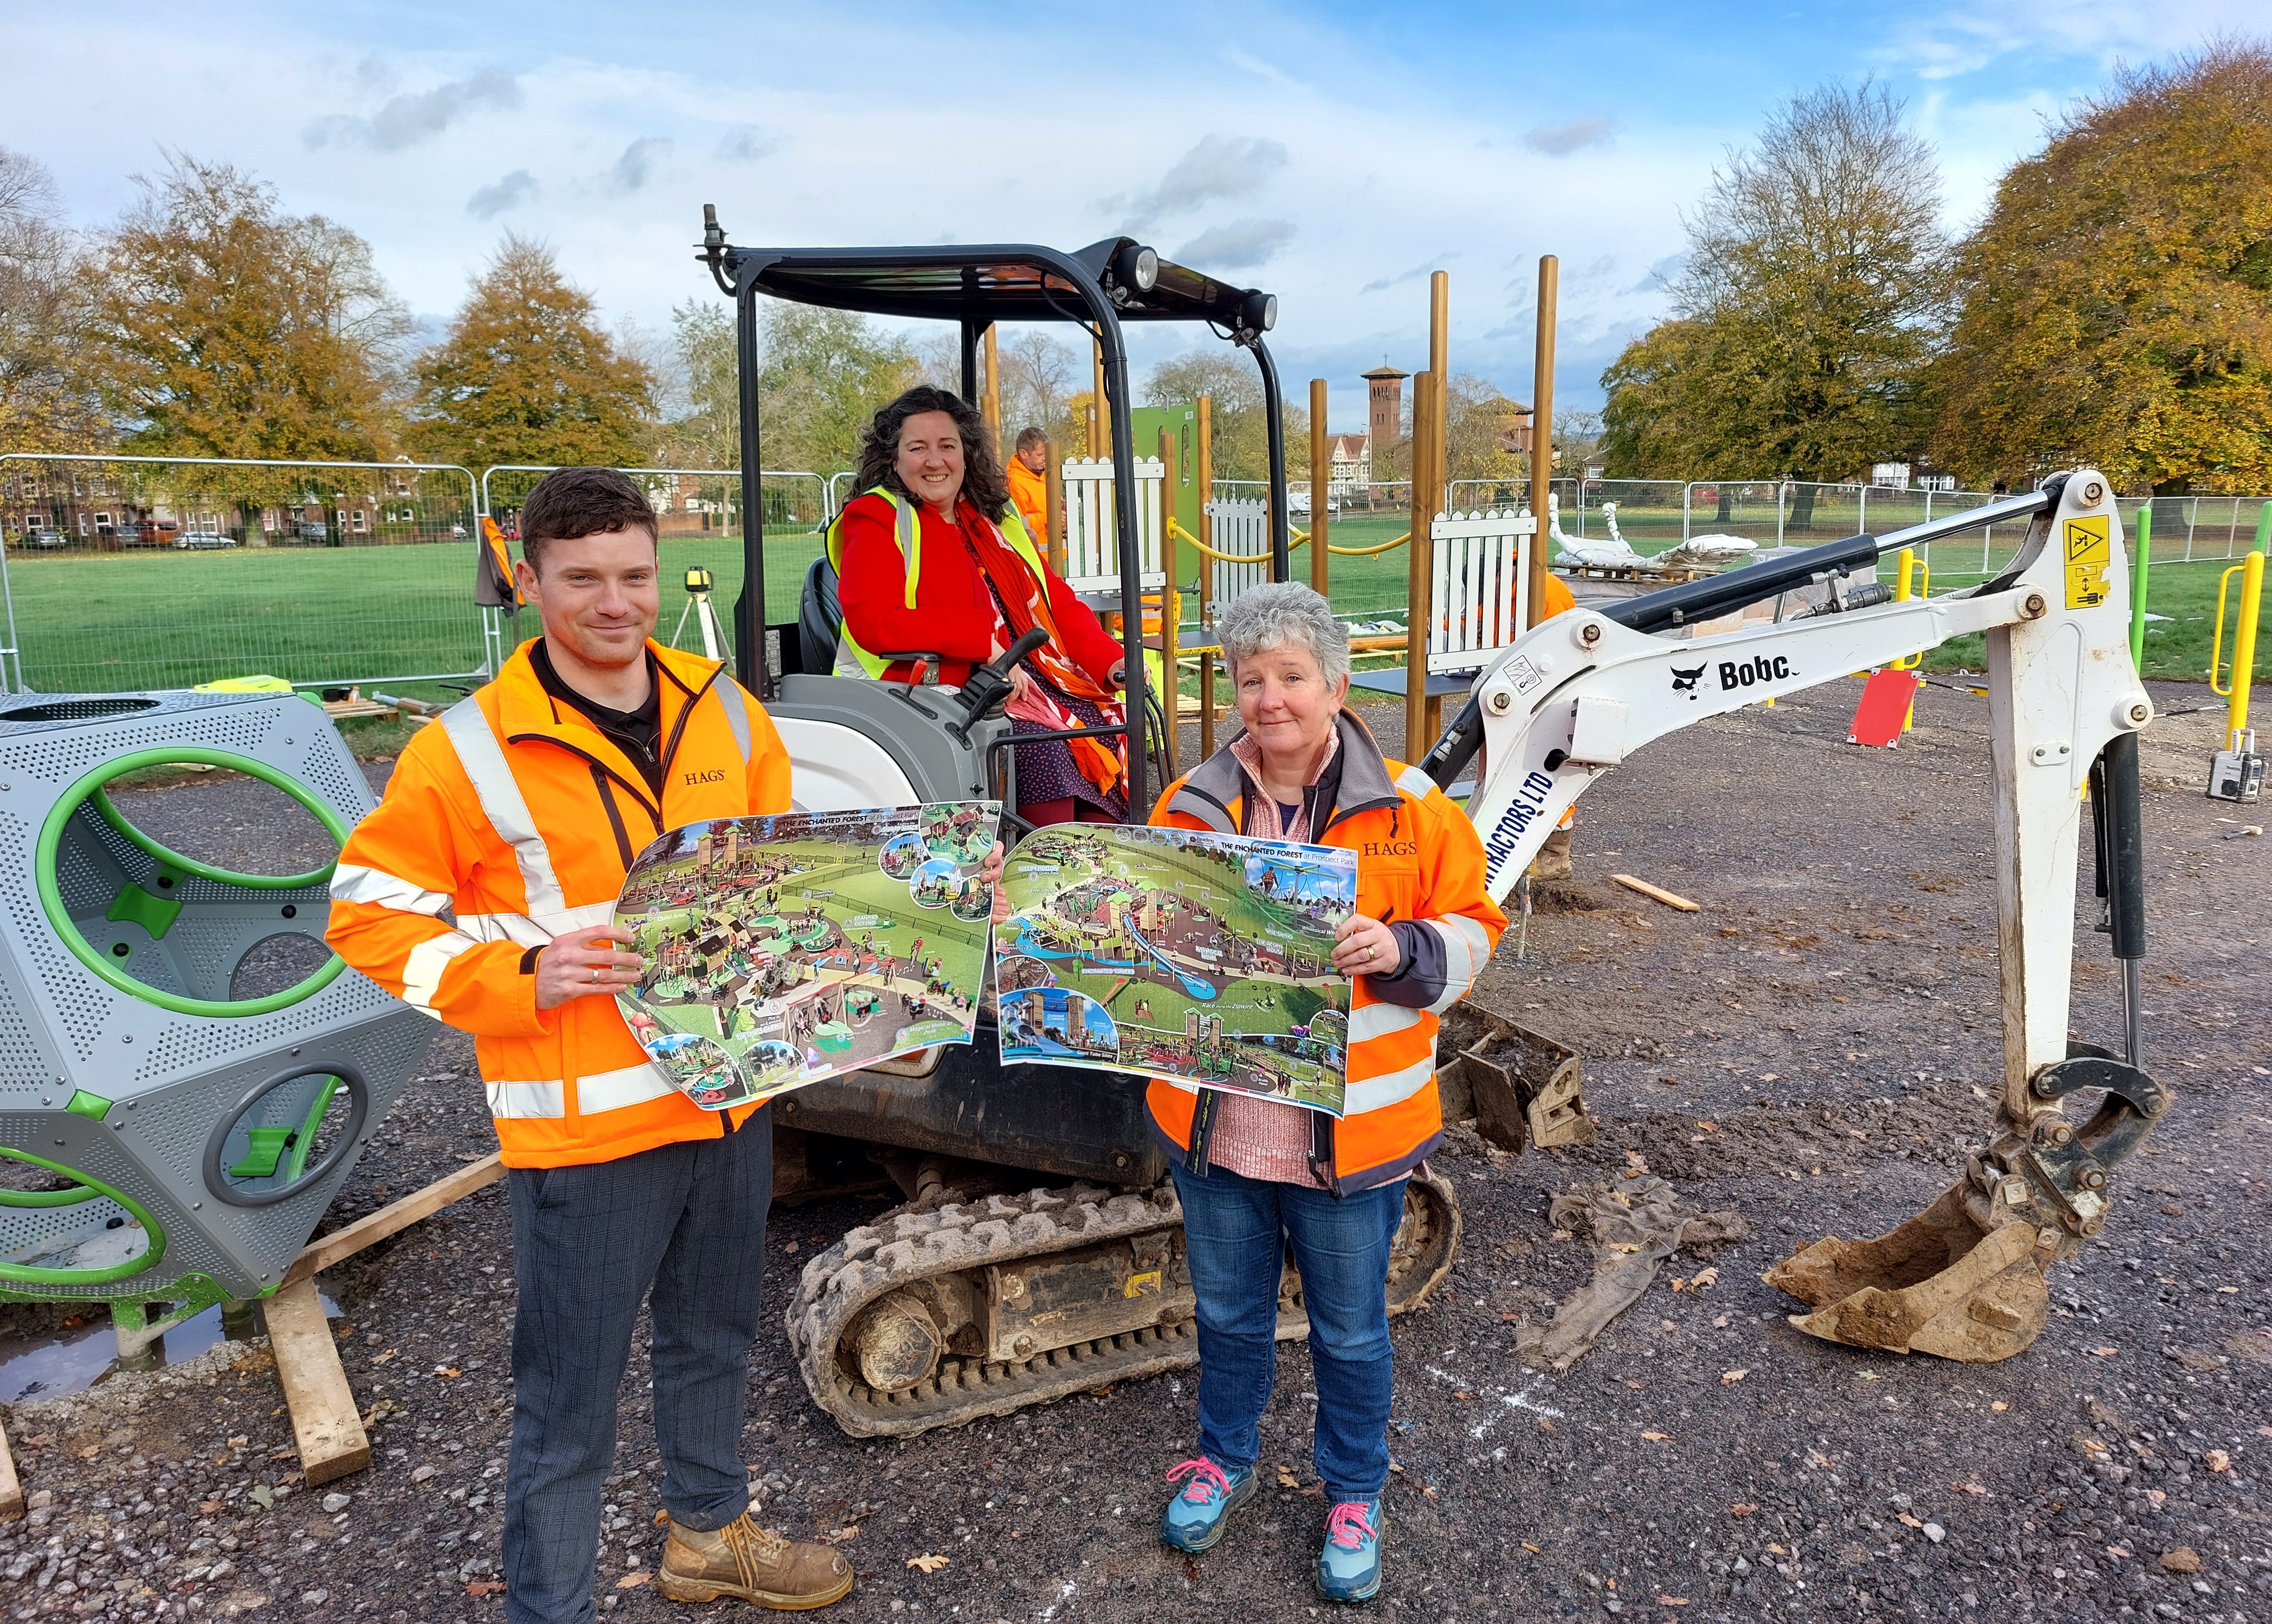 Within a playground construction workers are using equipment in the background. In the foreground two construction workers are holding up a decorative plan of what the park will look like after the construction work has finished.